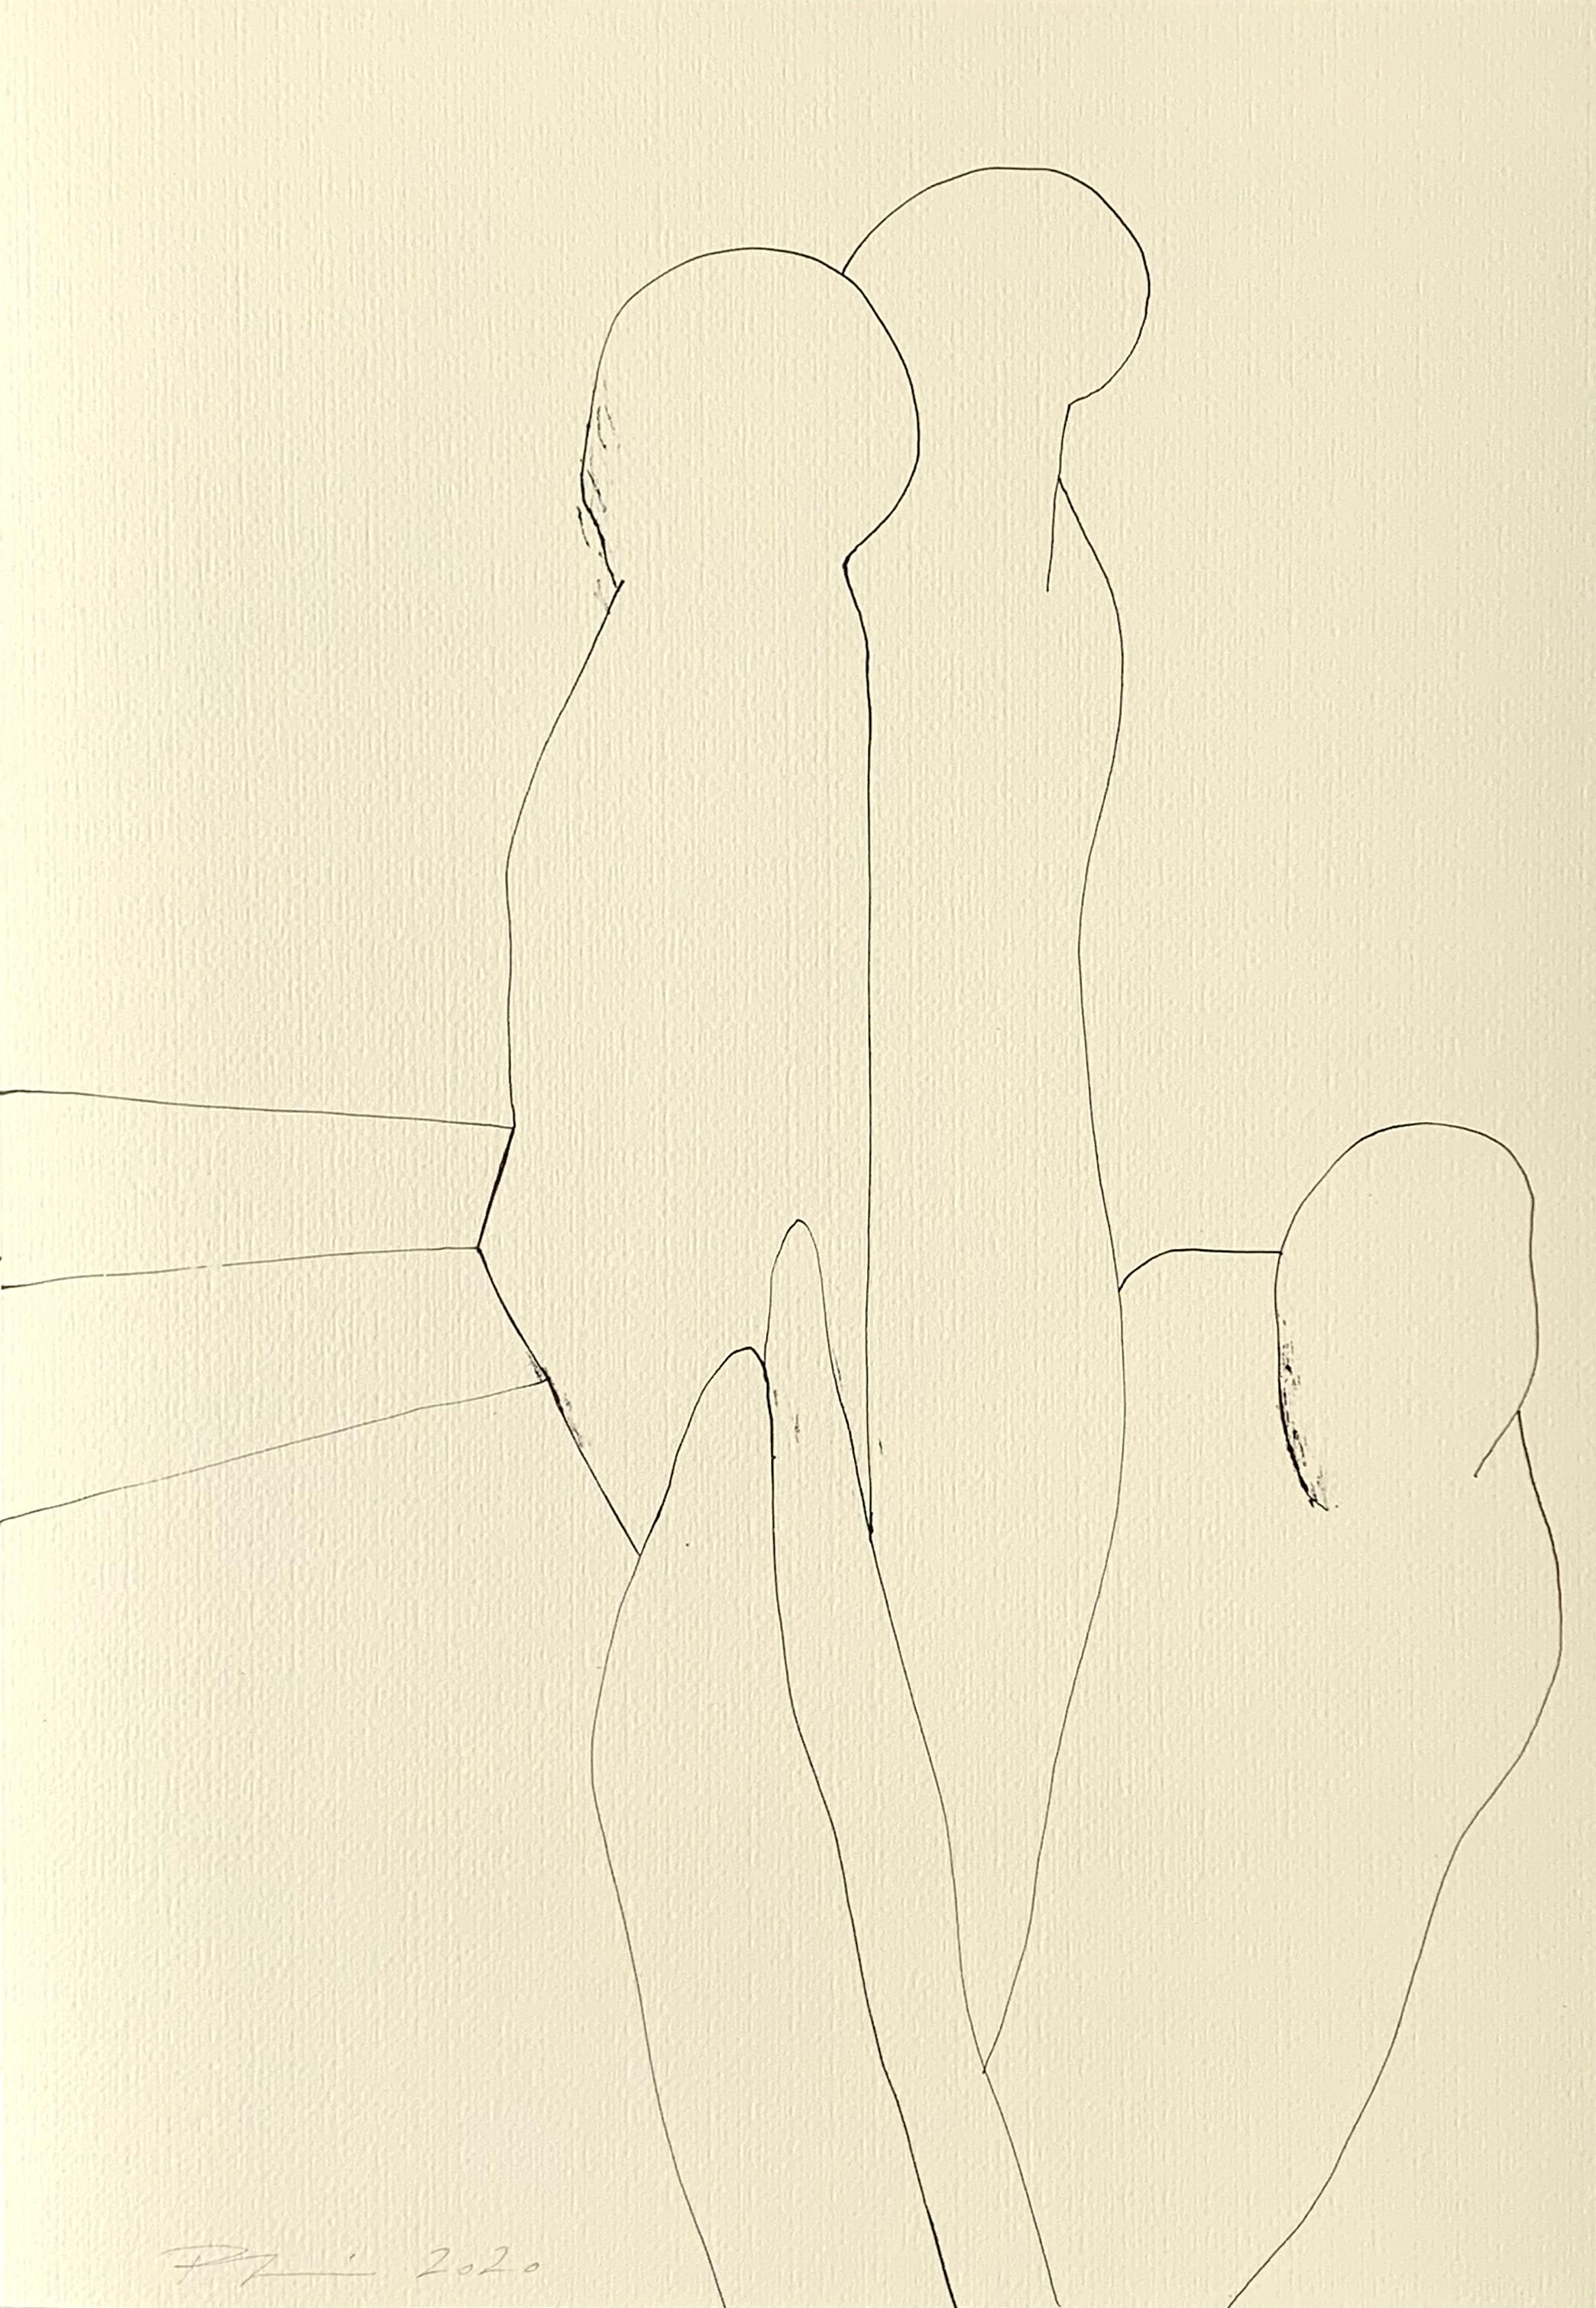 Reszegh Botond Nude - Large Original line drawing 'Weekdays Wrapped Up' Ink on paper Abstract Figure